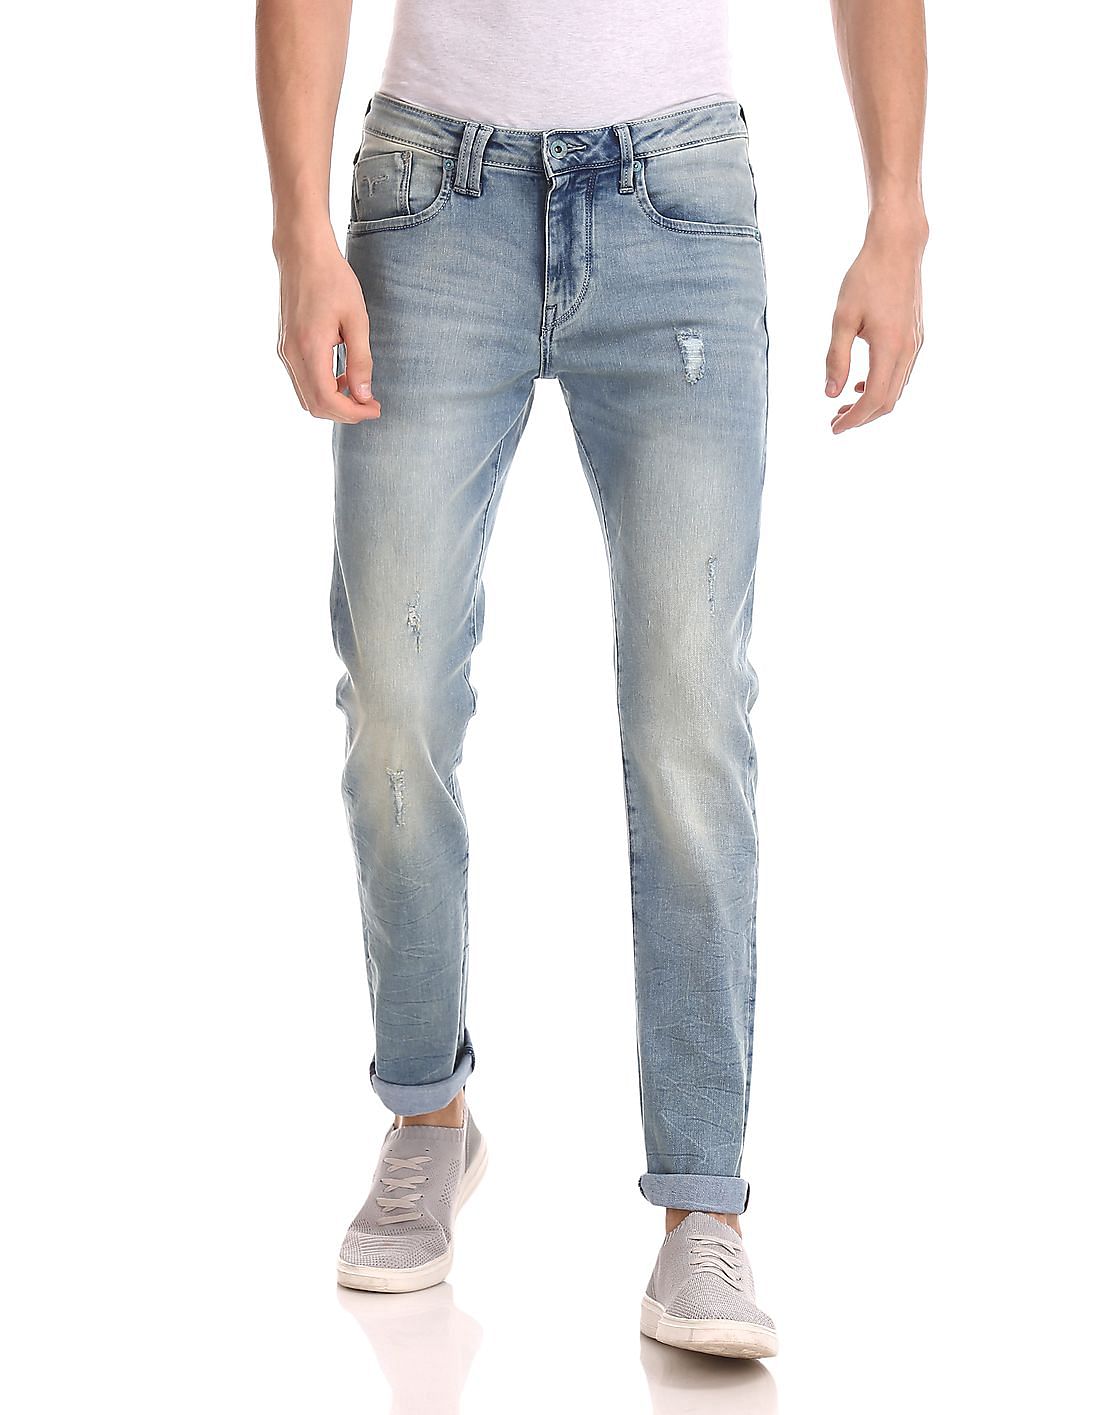 Buy Men Jackson Skinny Fit Distressed Jeans online at NNNOW.com